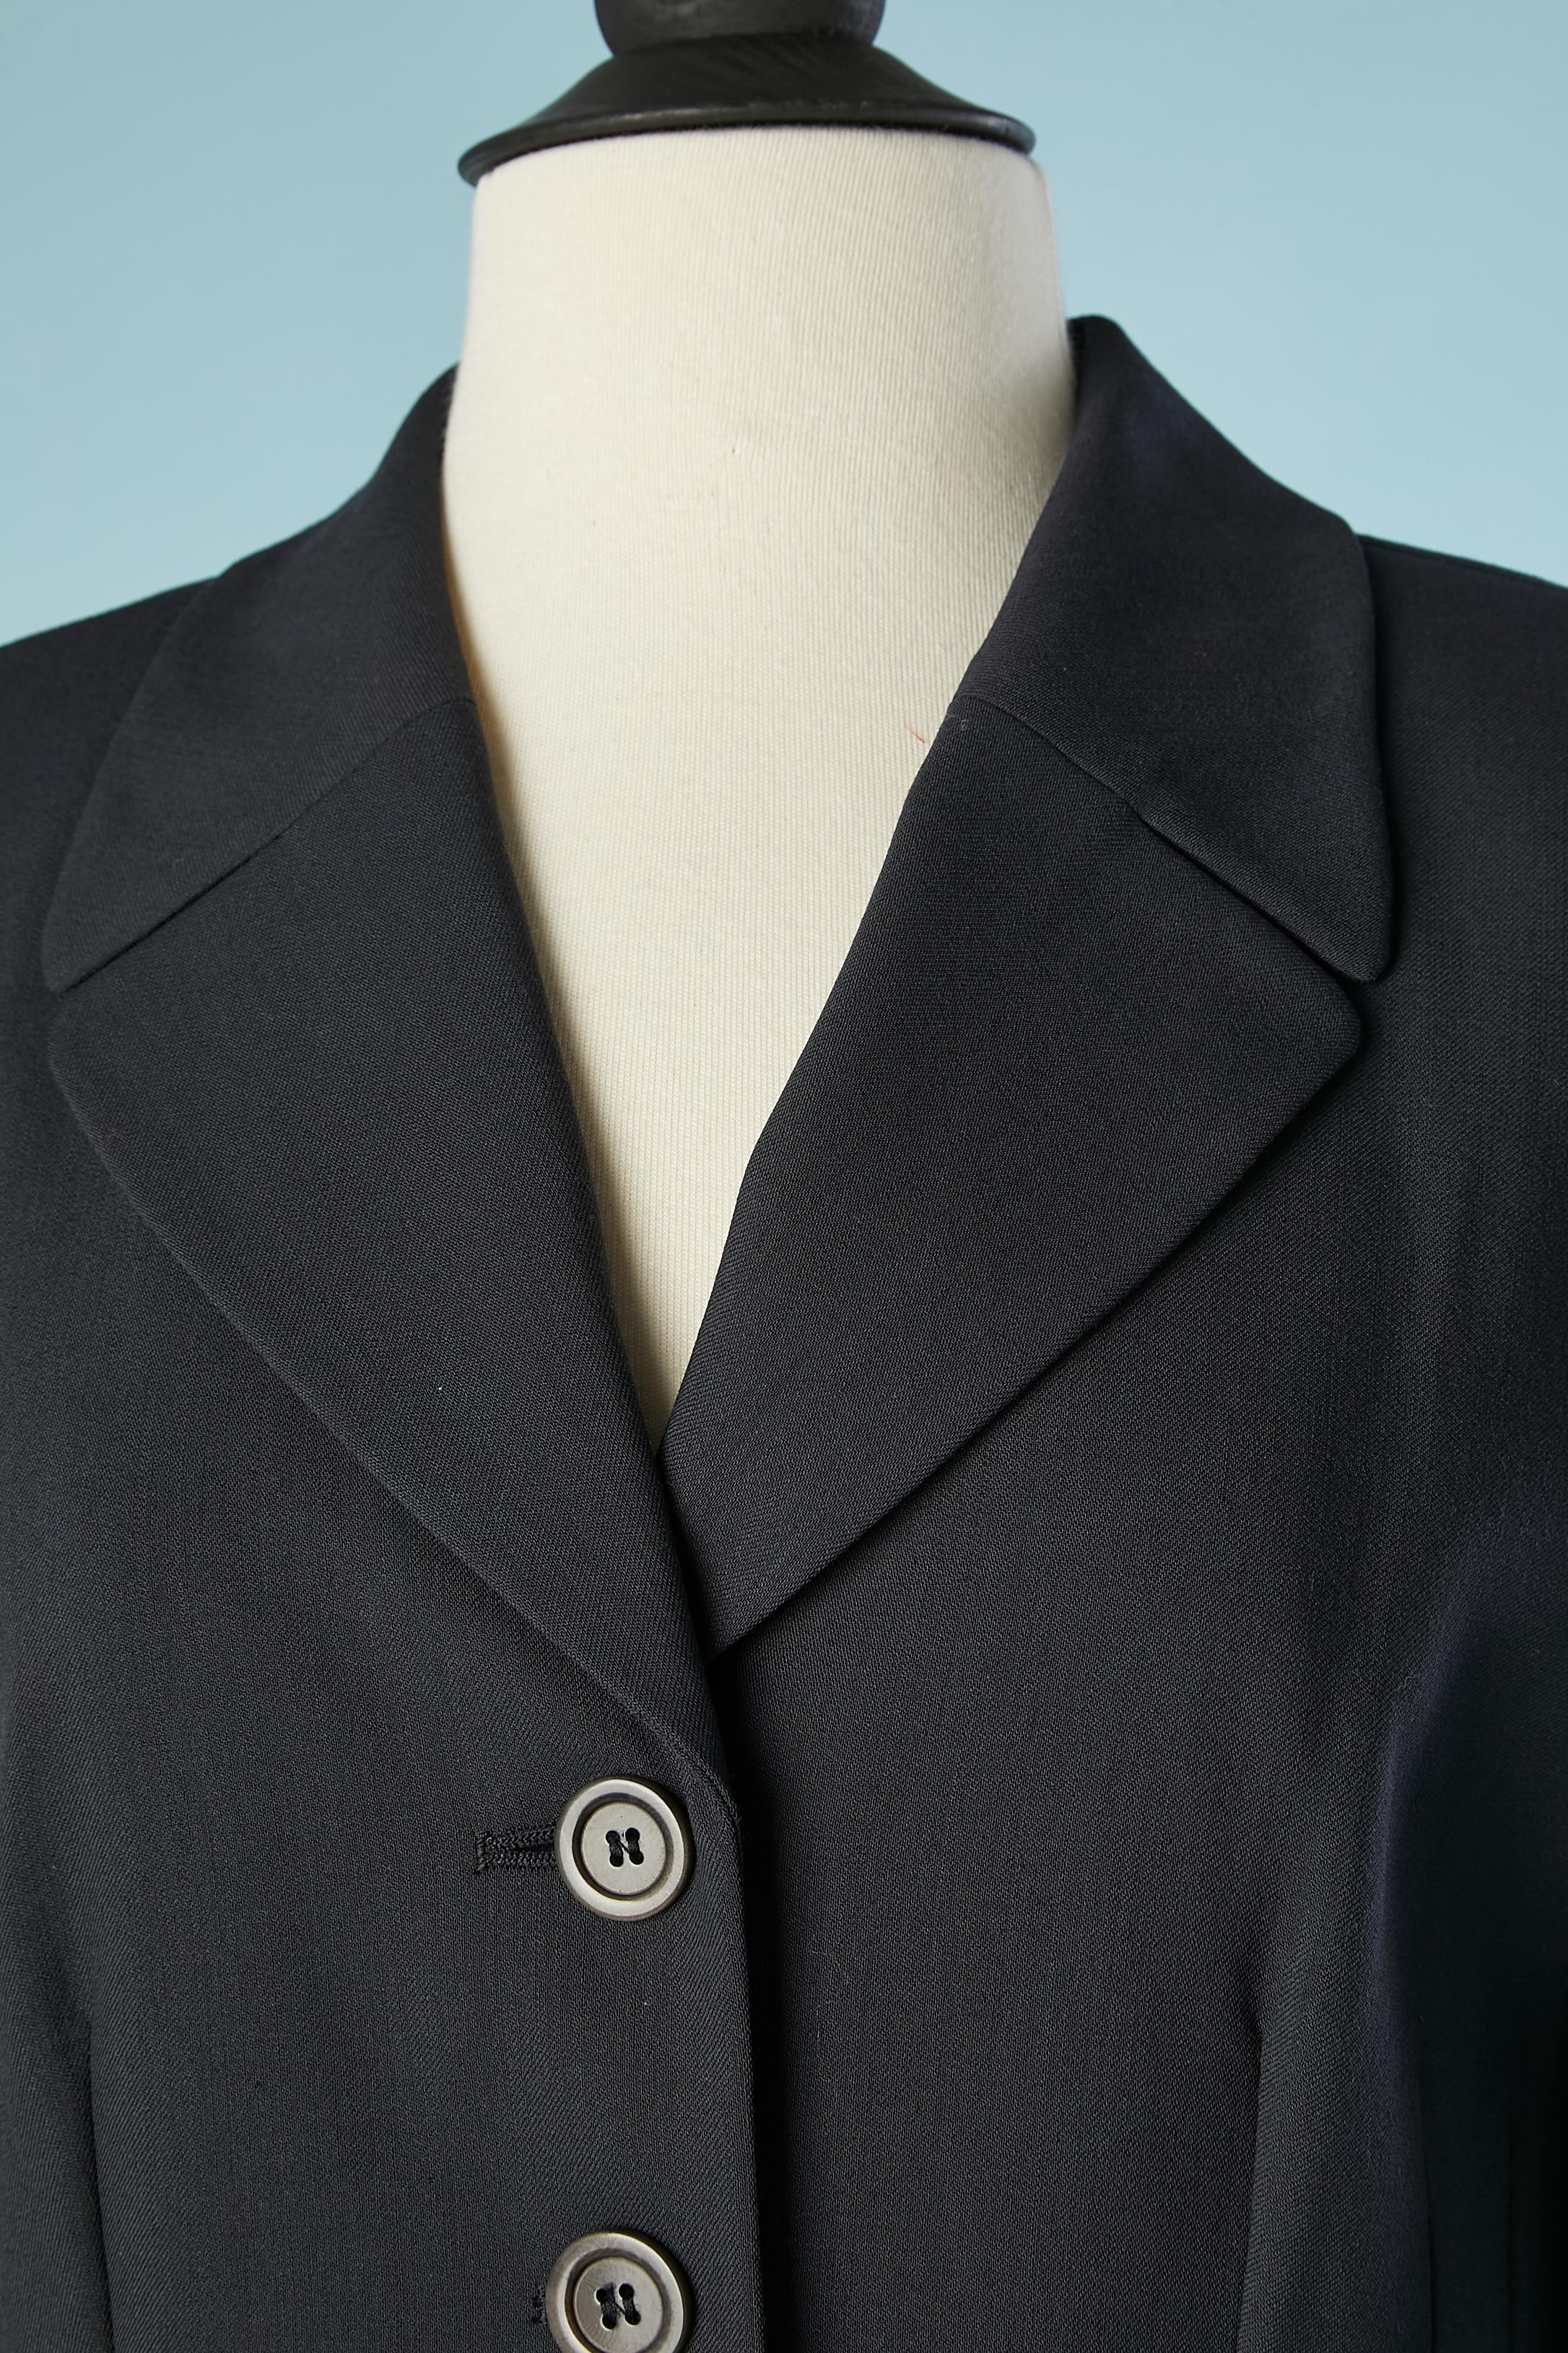 Wool navy blue trouser-suit (and skirt as well). Fabric composition: 100% wool. Lining composition: 100% Cupro ( sort of rayon) 
Shoulder pads .
SIZE 40 (Fr) 8 (Us) 